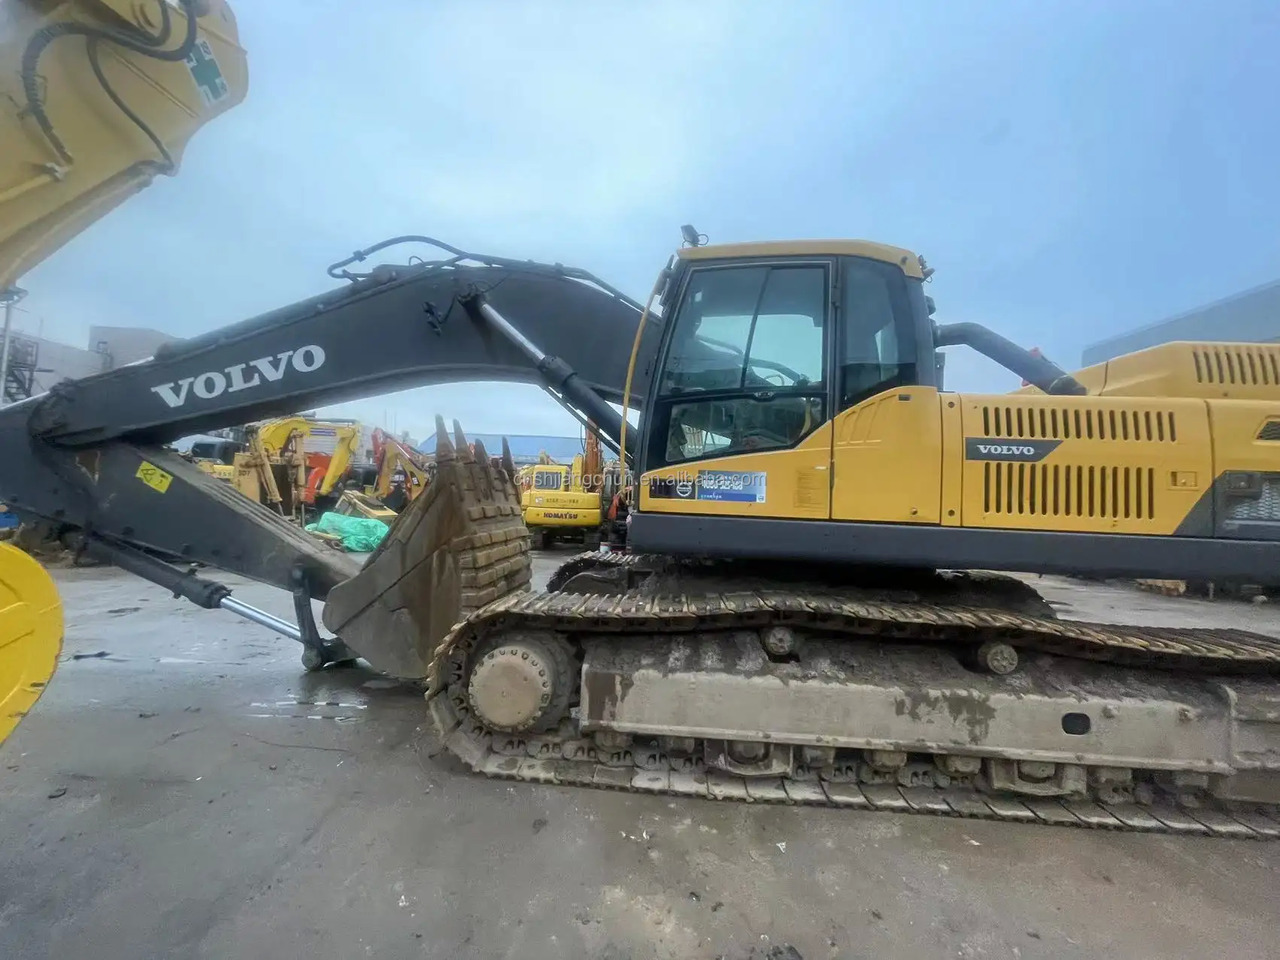 Bandgrävare second hand  hot selling Excavator construction machinery parts used excavator used  Volvo EC480D  in stock for sale: bild 2